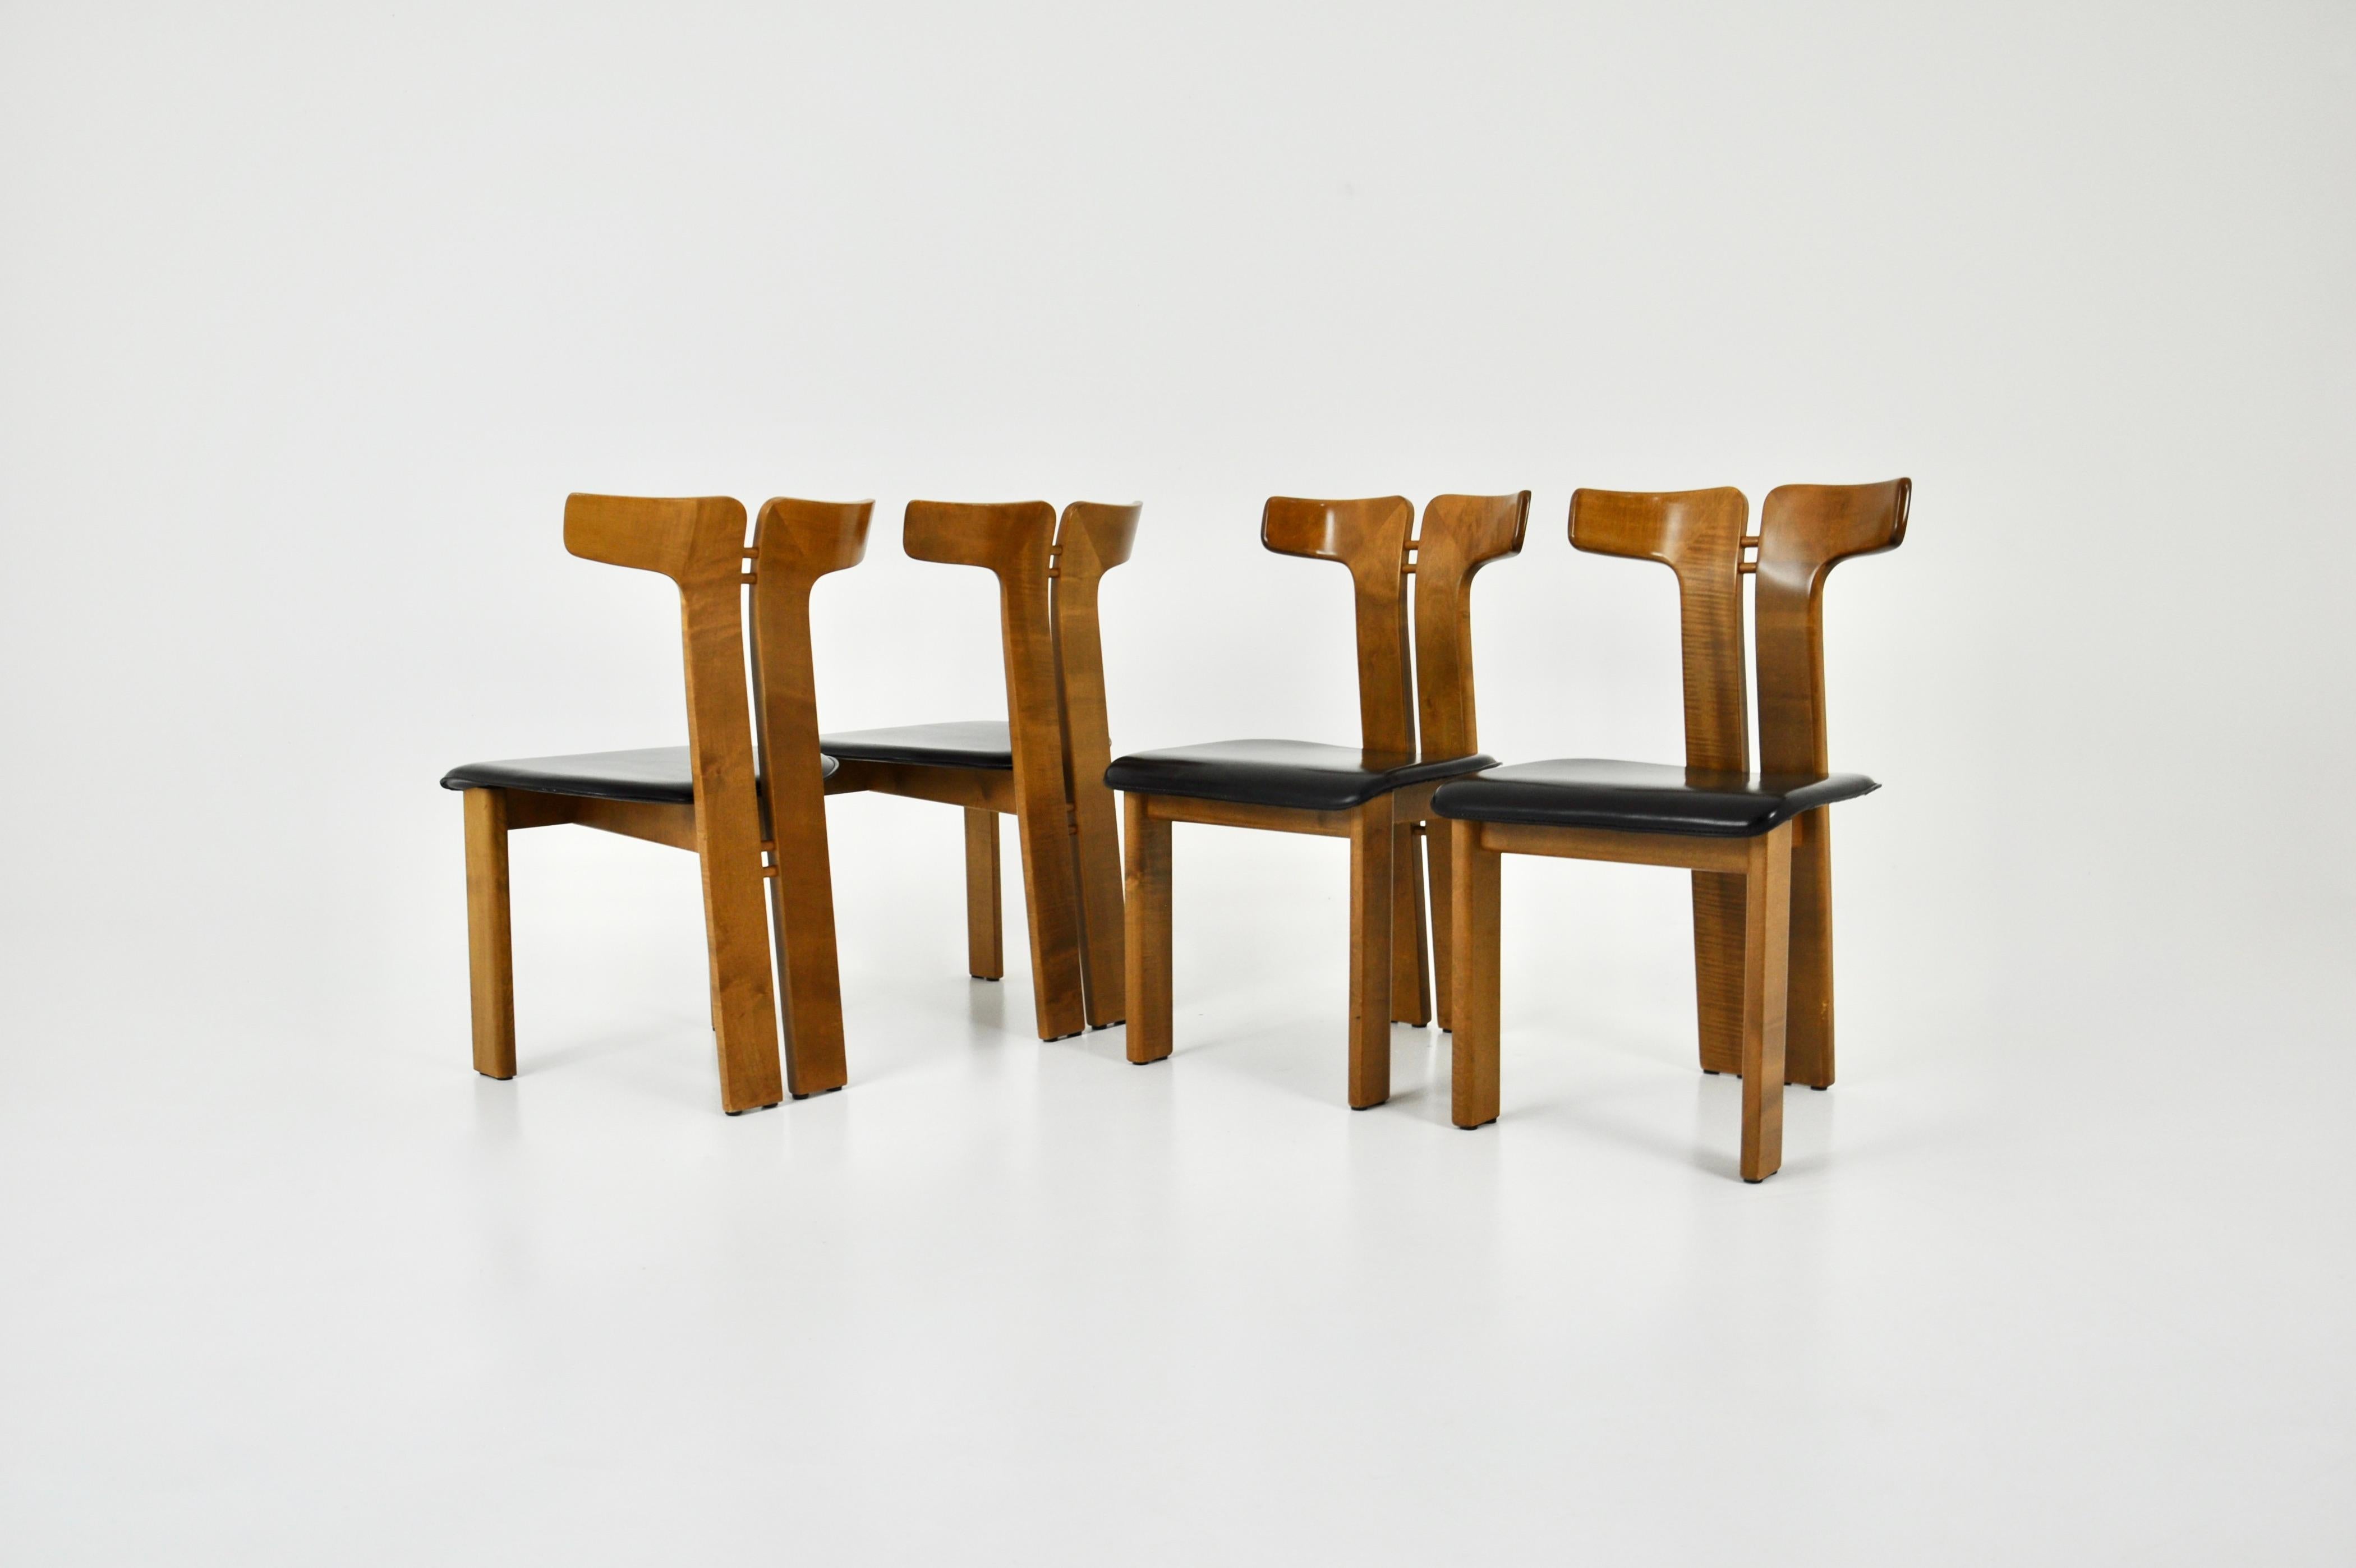 Set of 4 leather and wood chairs by Pierre Cardin Italy 1980s. Seat height: 42cm. Wear due to time and age of the chairs.